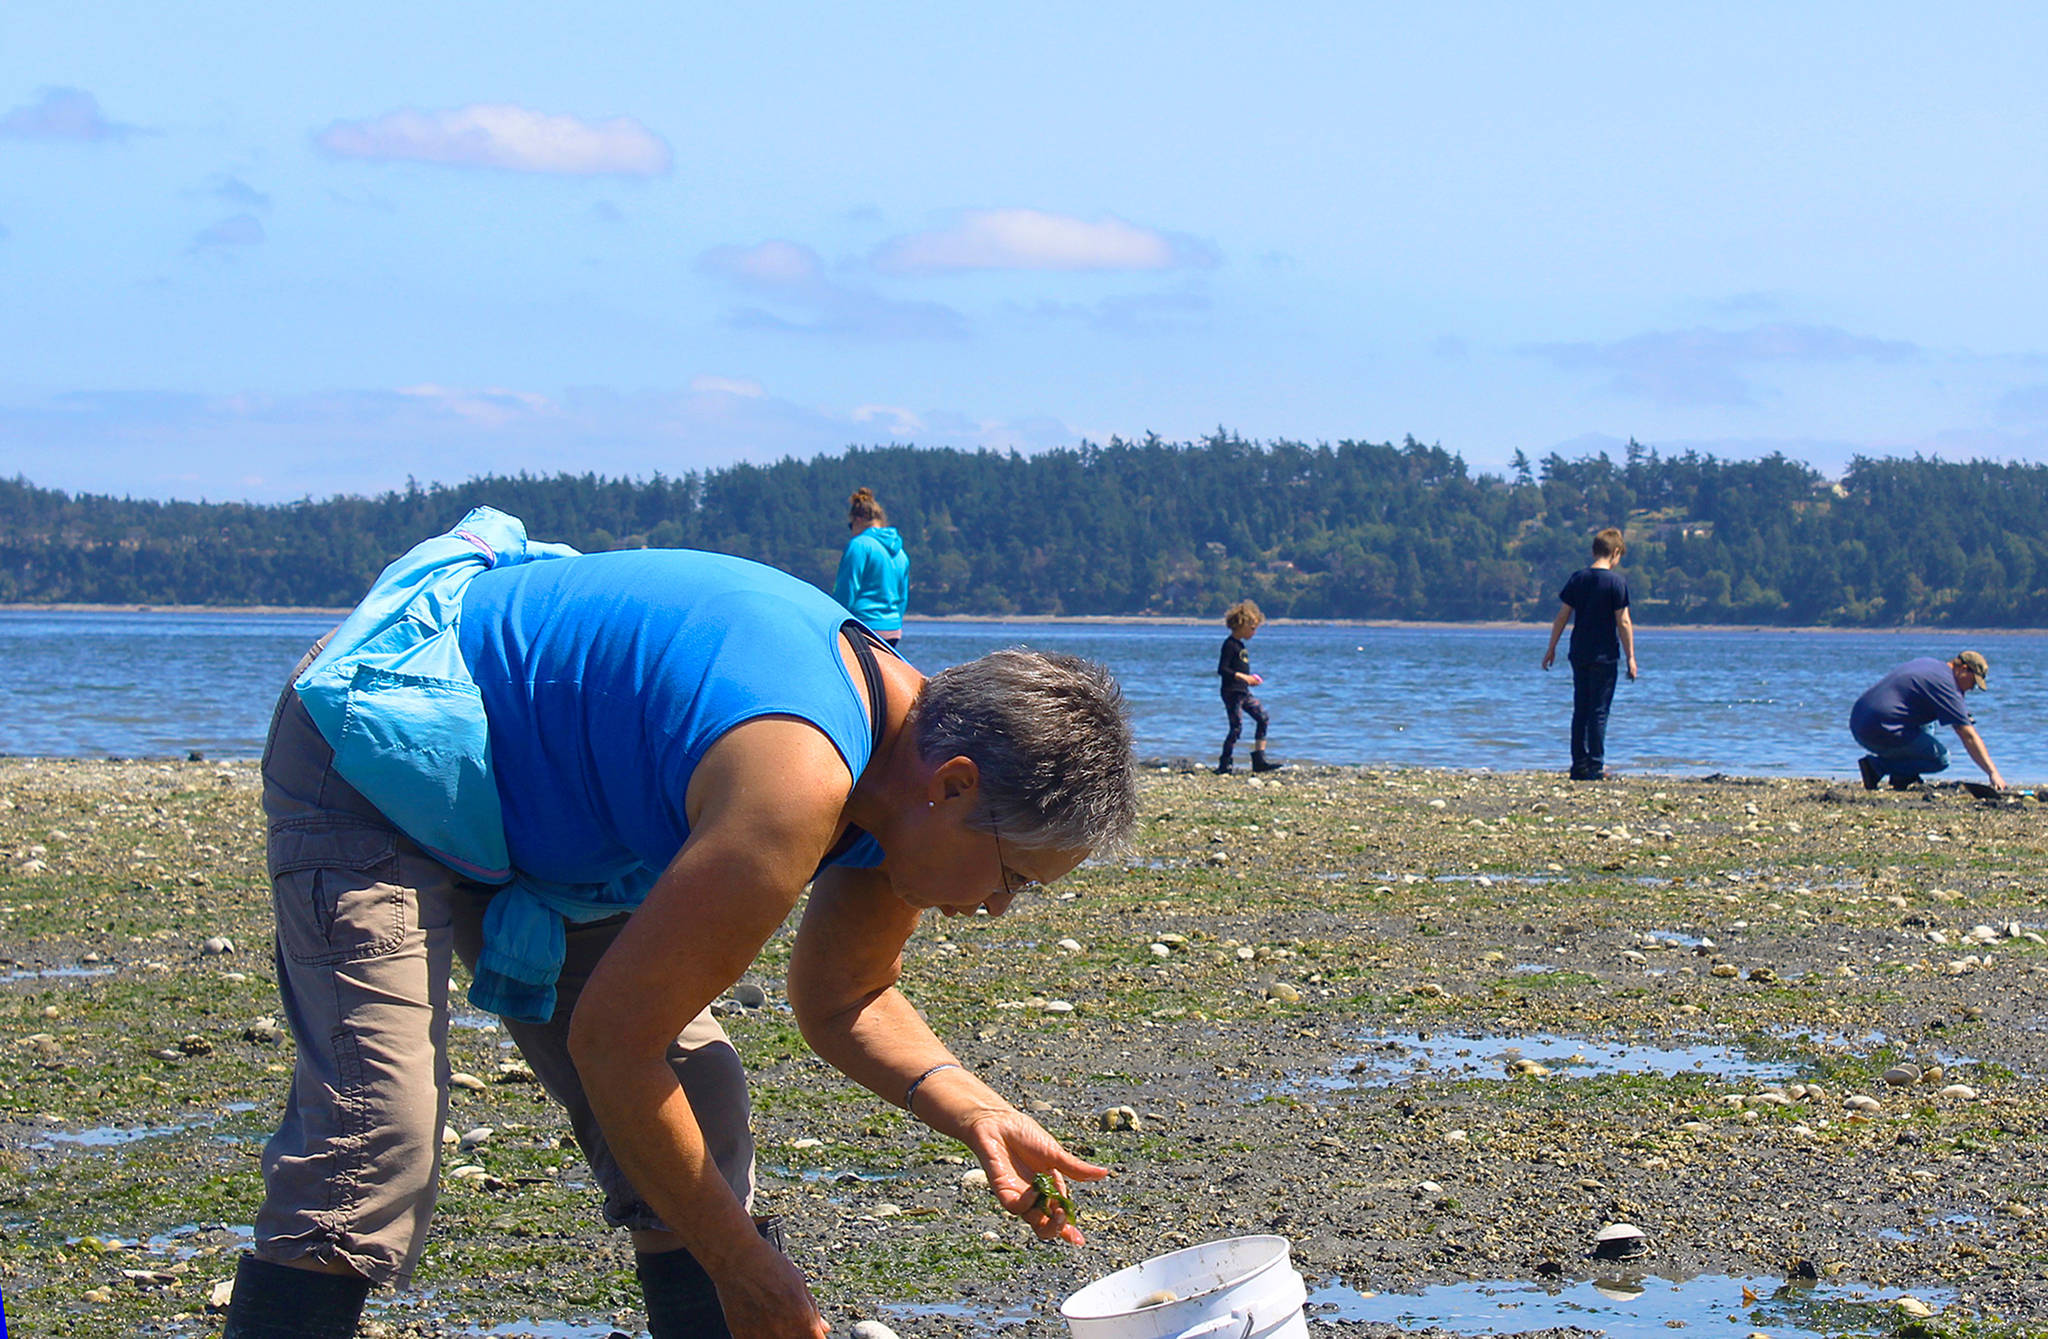 Keeping to the state daily limit of 40 clams weighing no more than ten pounds, Becky Cormier counts the butter clams she unearthed at Penn Cove recently. Photo by Patricia Guthrie/Whidbey News-Times